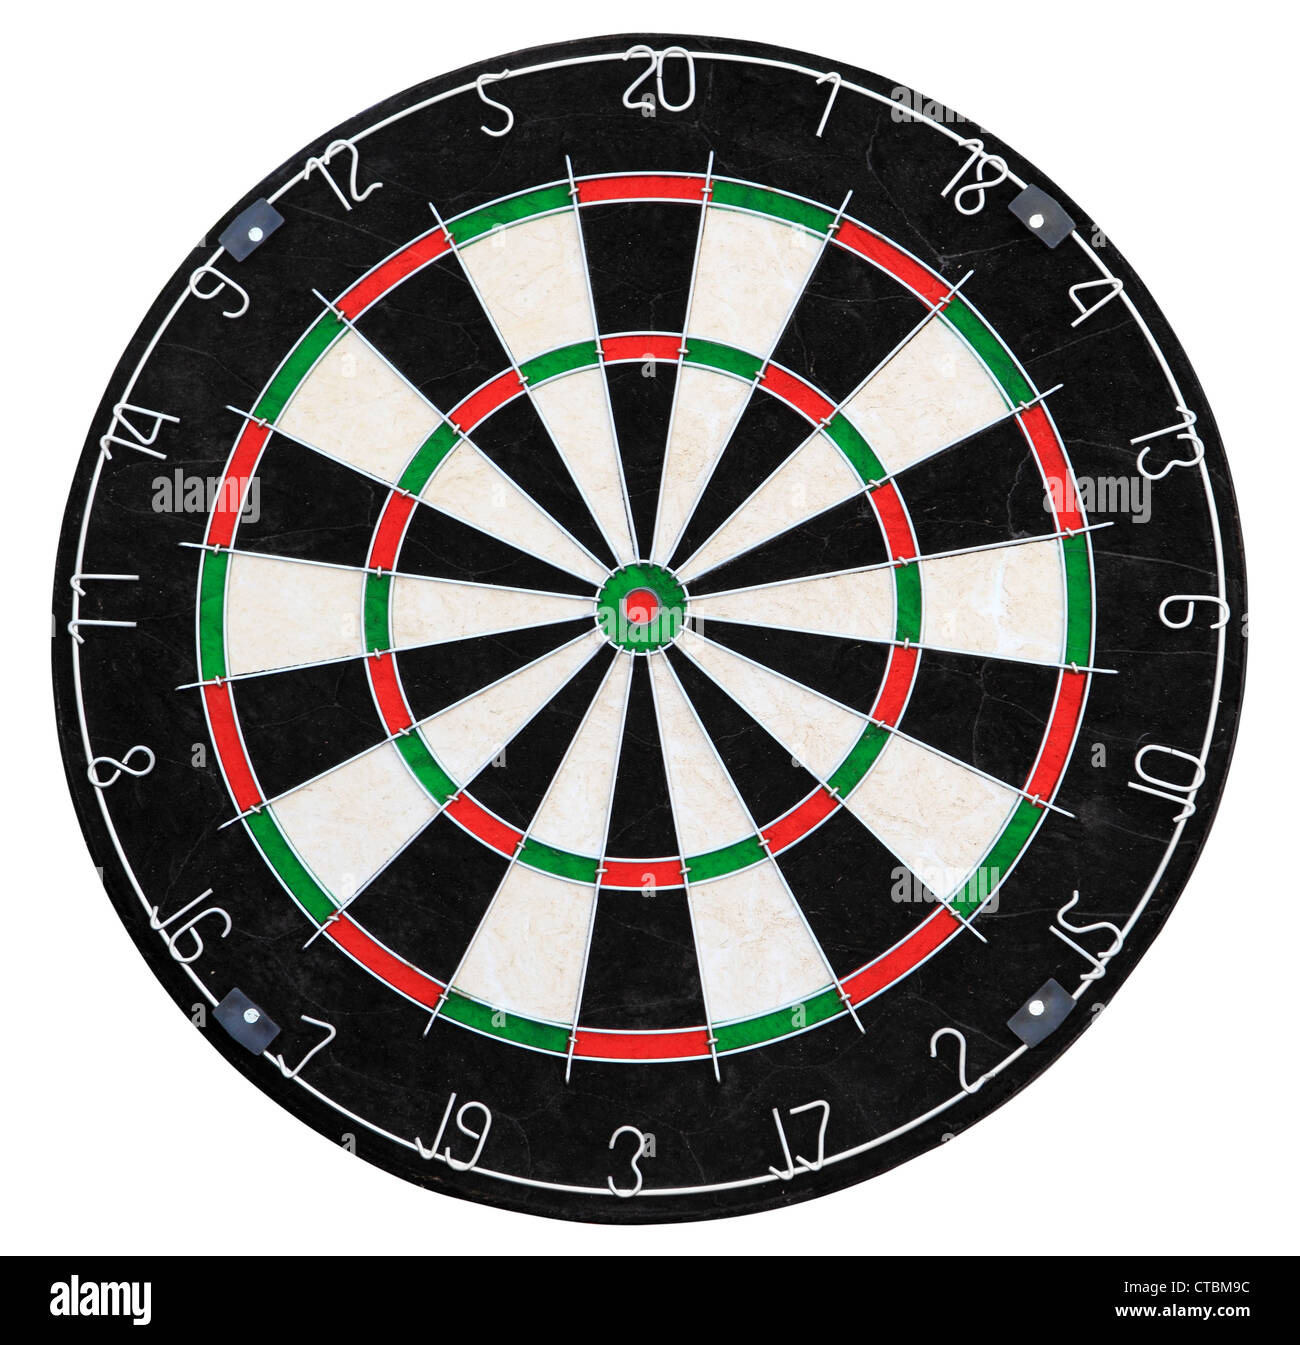 Target for darts on the white background Stock Photo